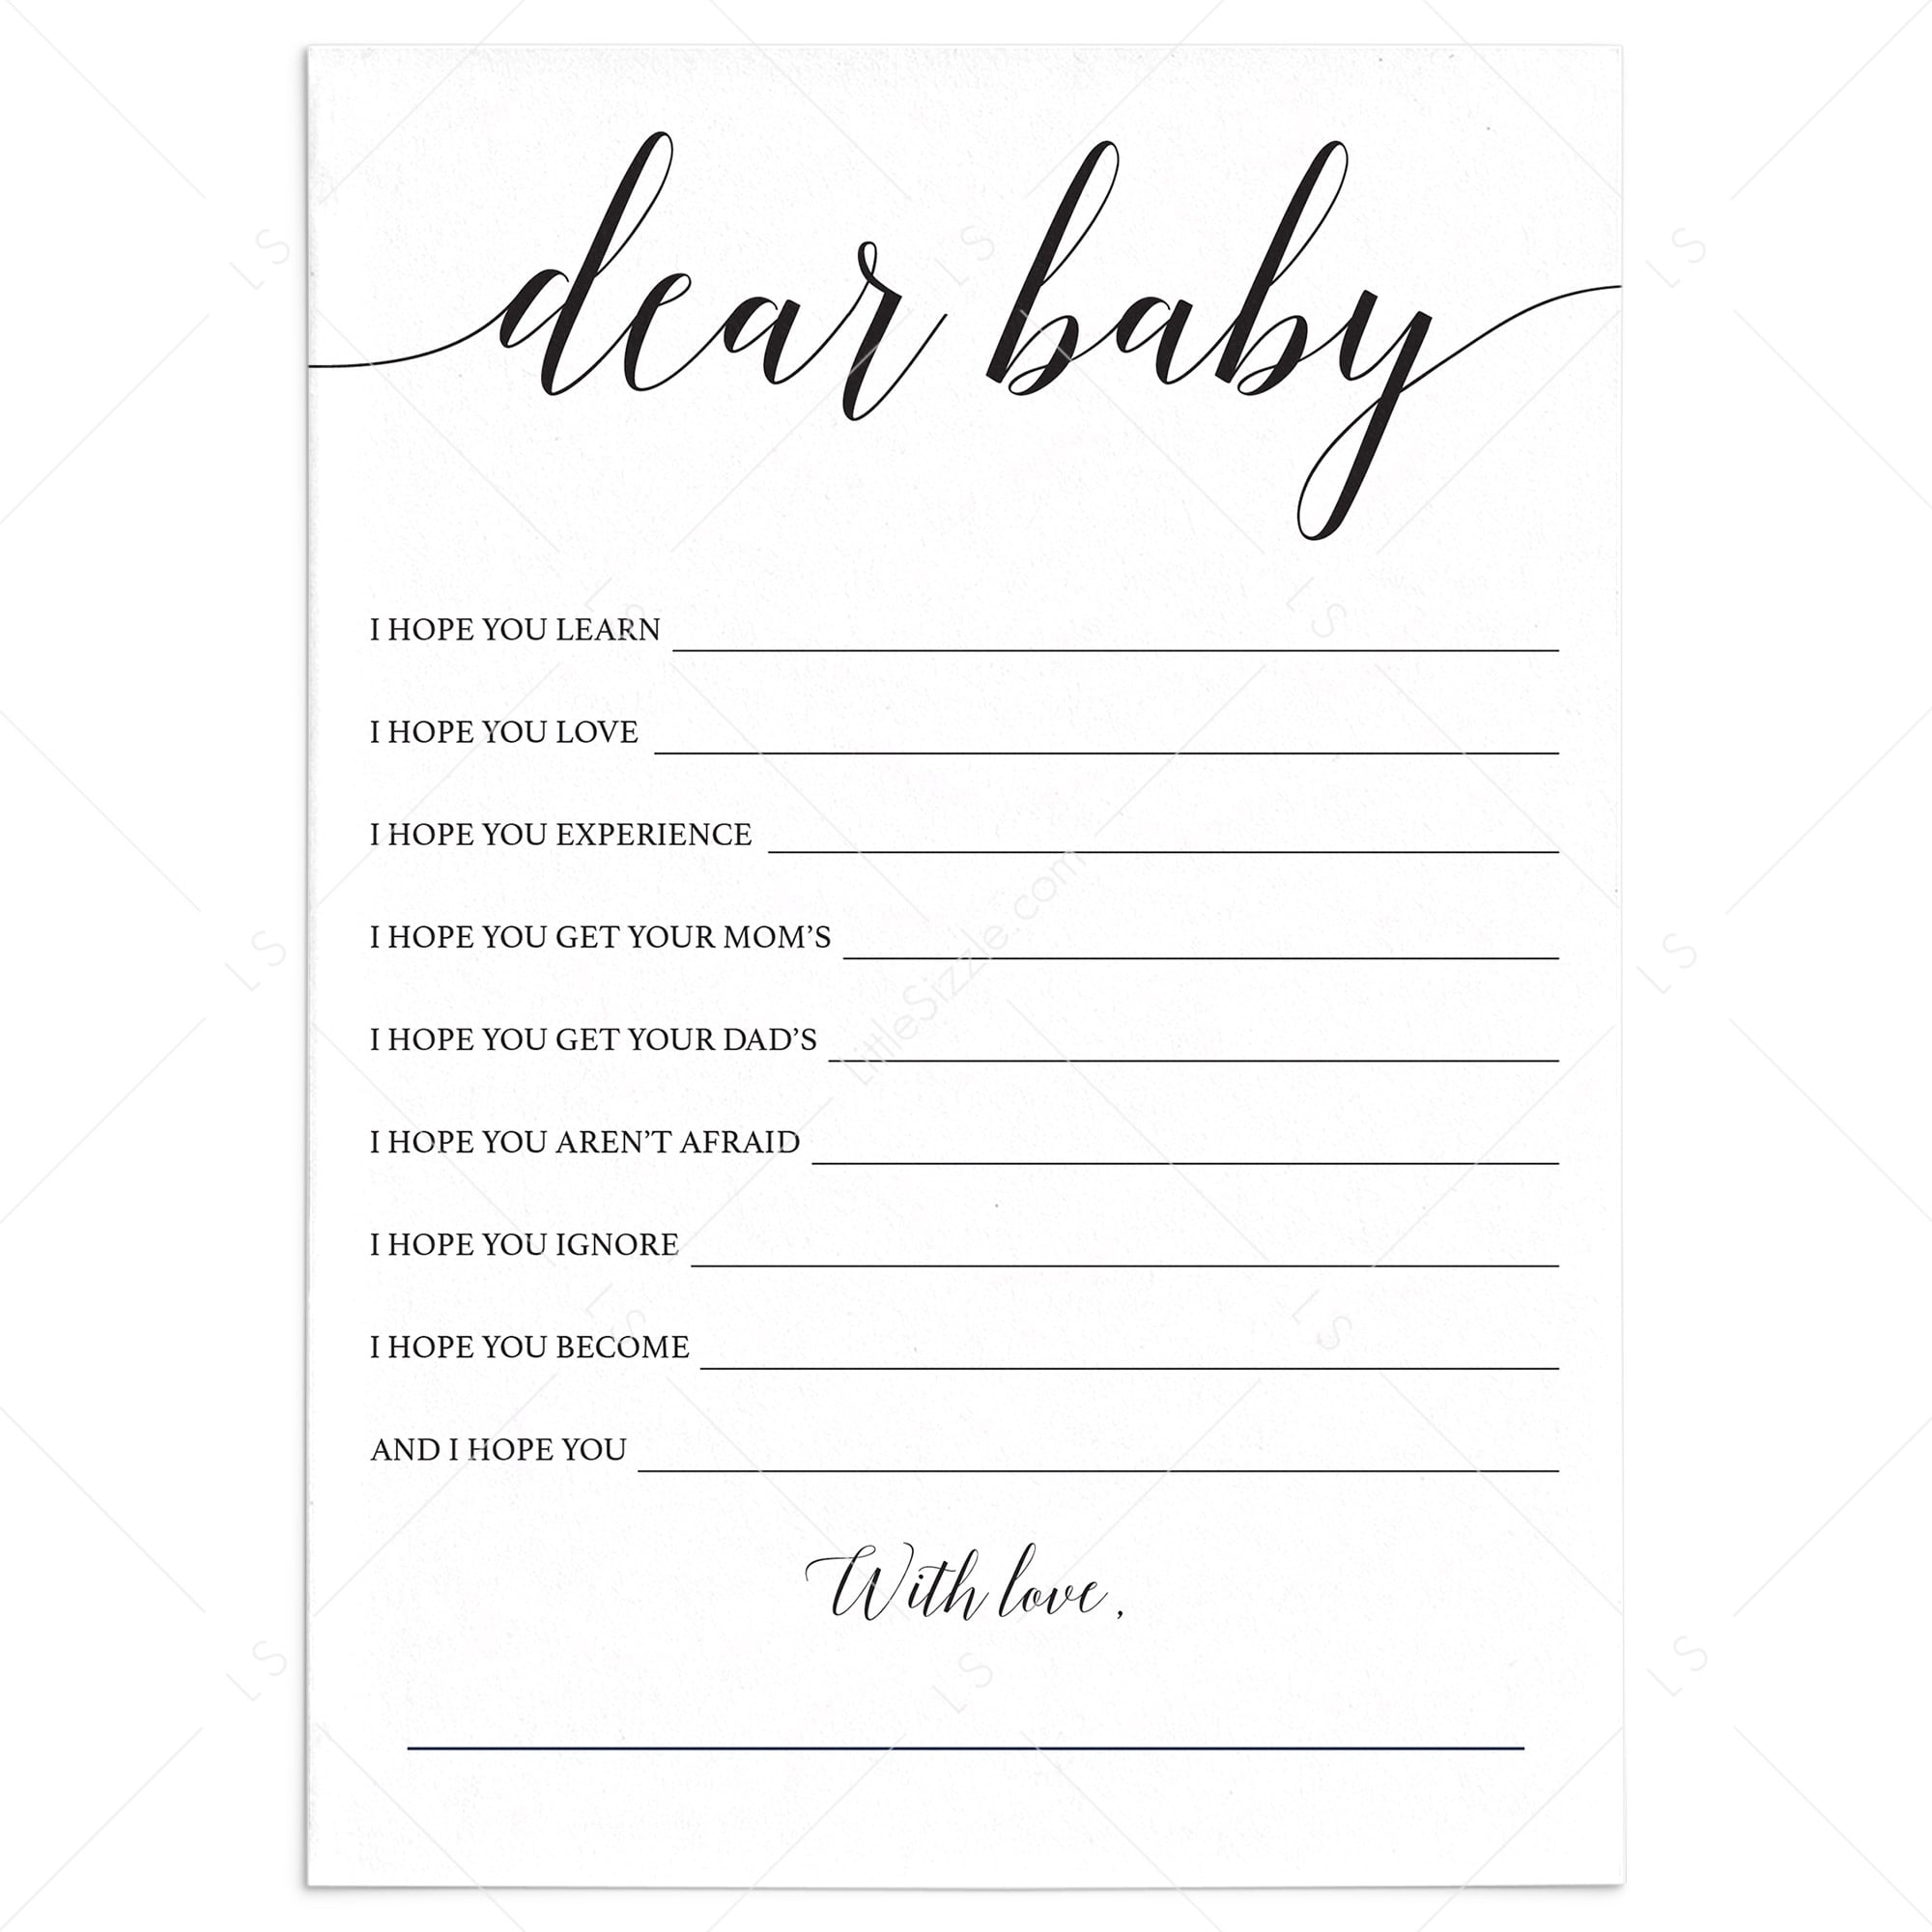 Elegant baby wishes cards by LittleSizzle